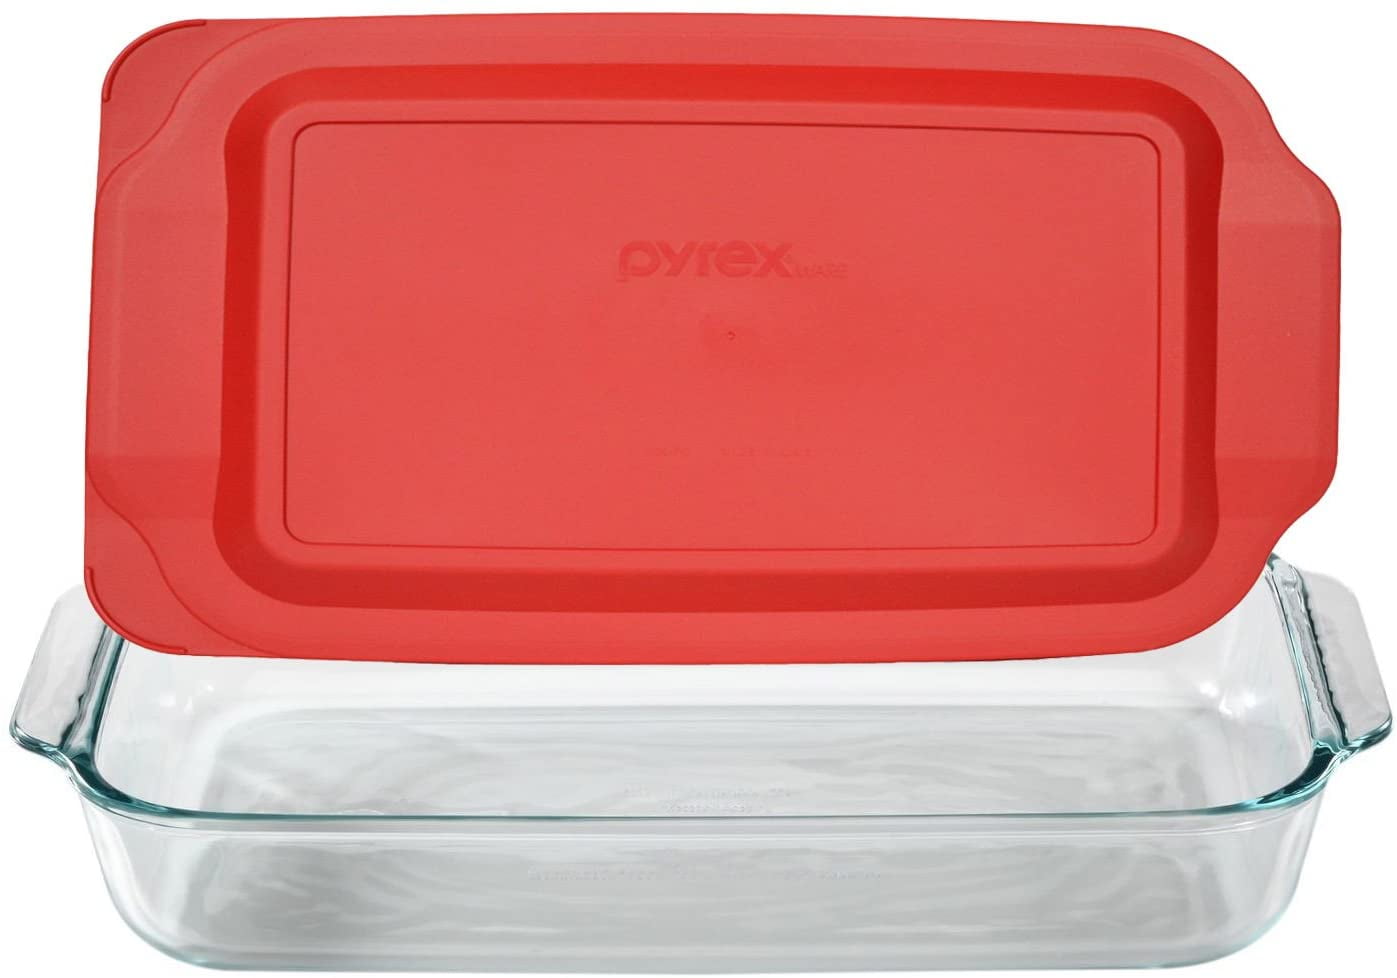 2-quart Pyrex Easy Grab Glass Oblong Baking Dish with Red Plastic Lid 